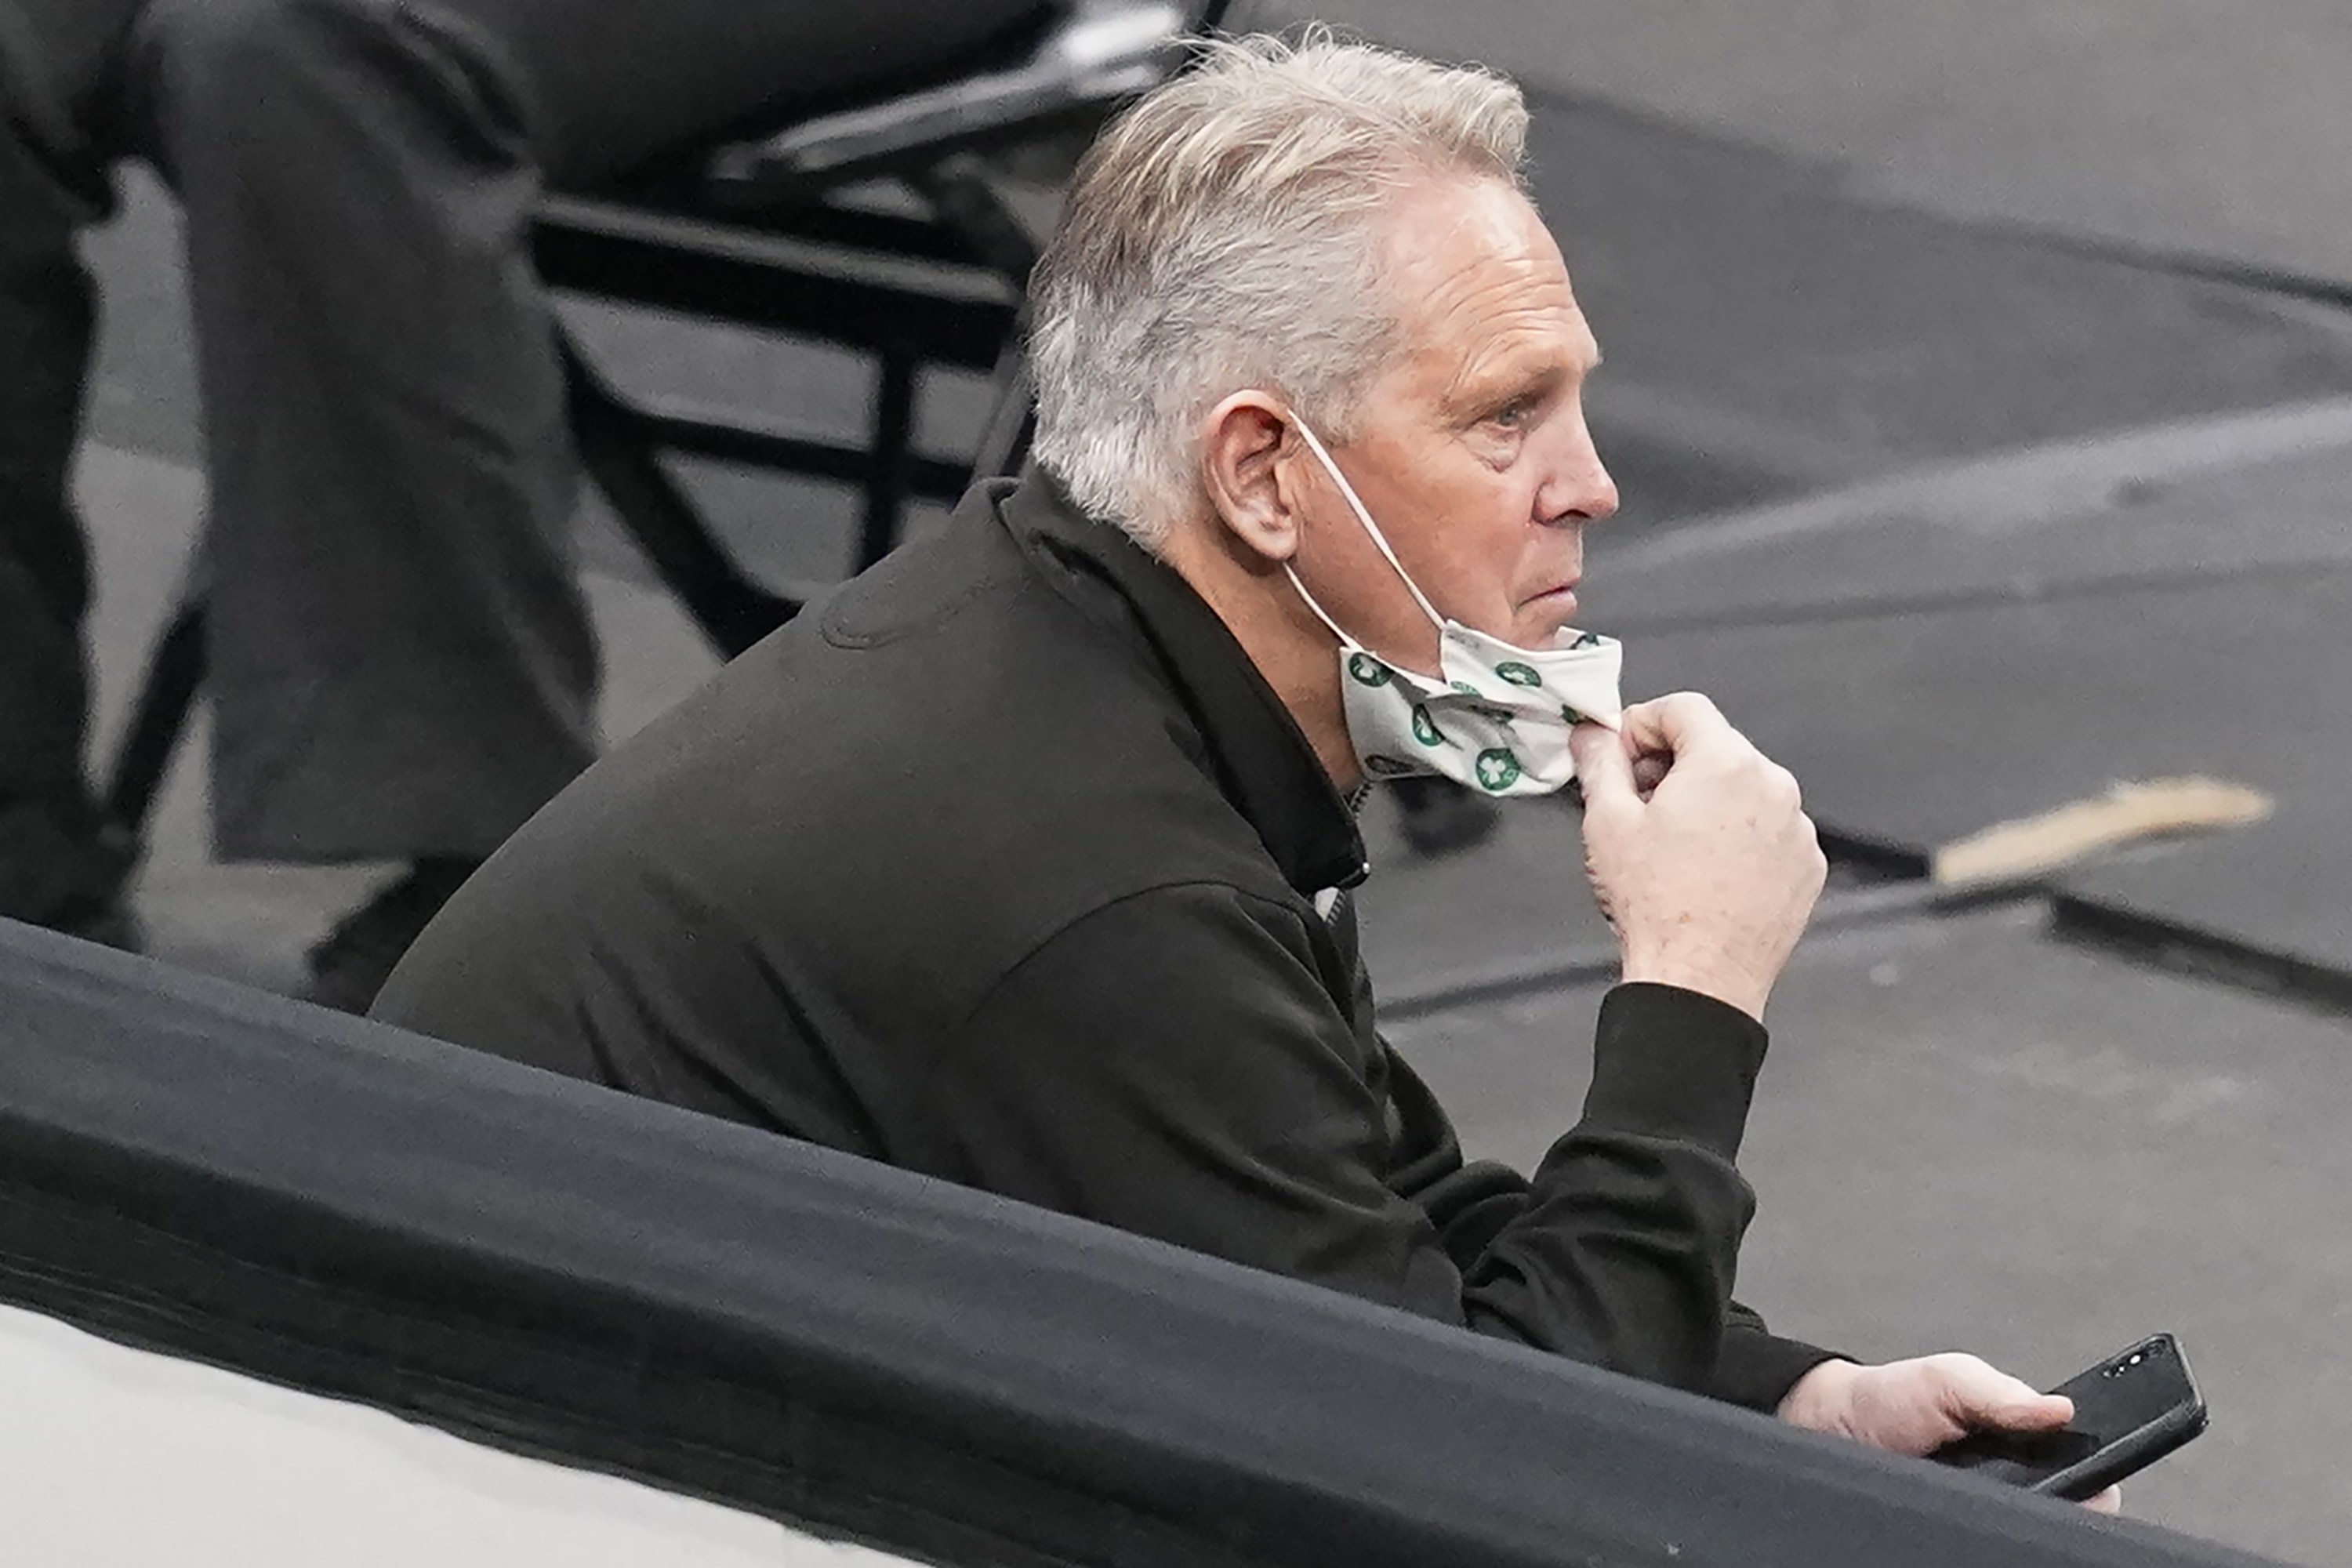 ESPN - Photos - Ainge: 'I had to get help before I died